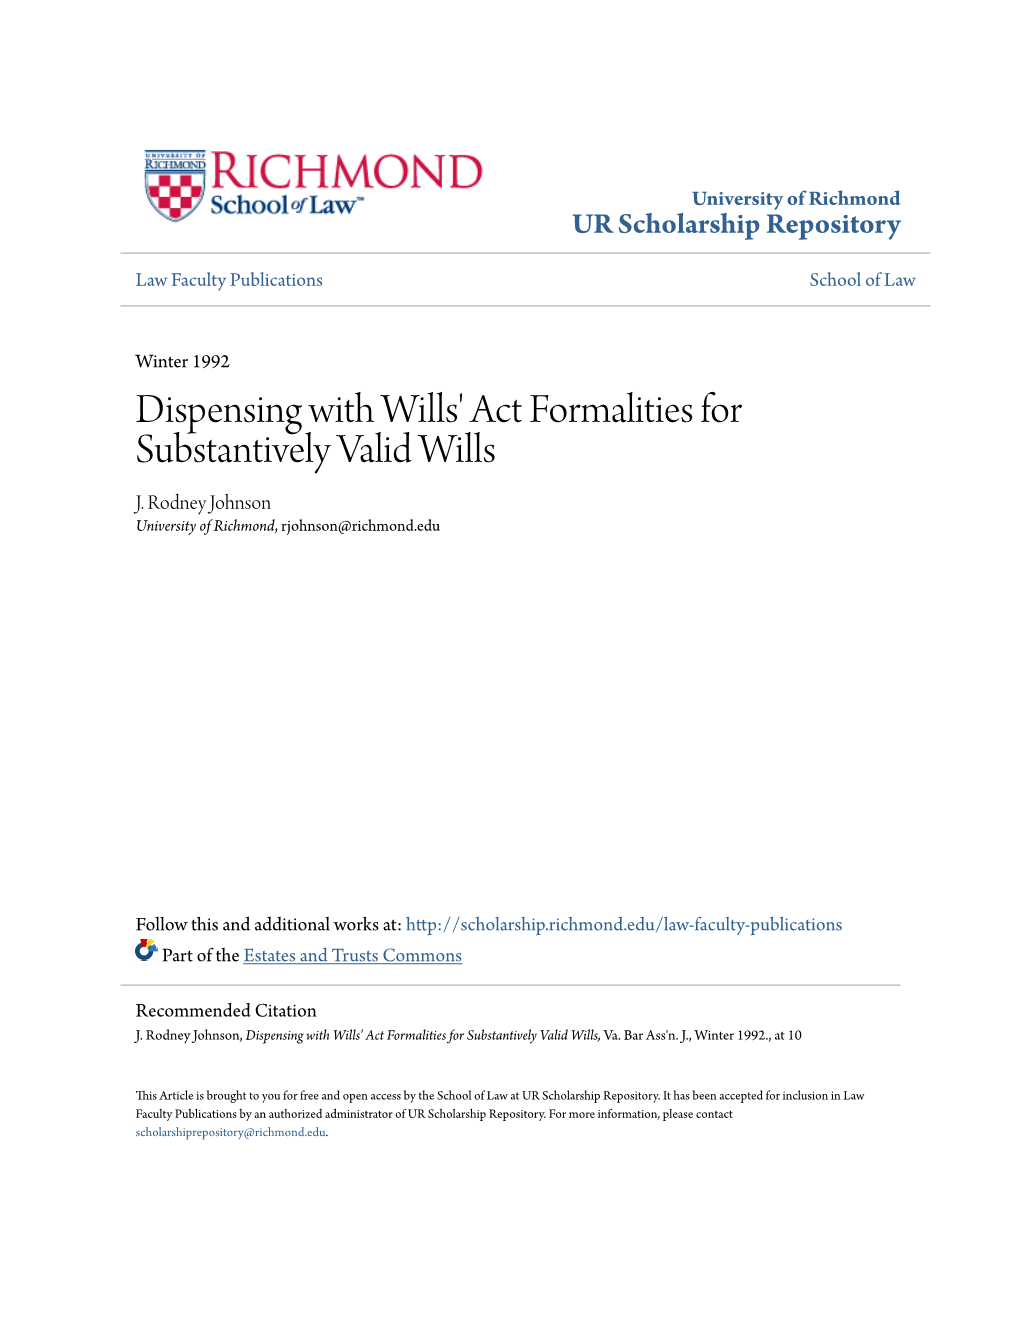 Dispensing with Wills' Act Formalities for Substantively Valid Wills J